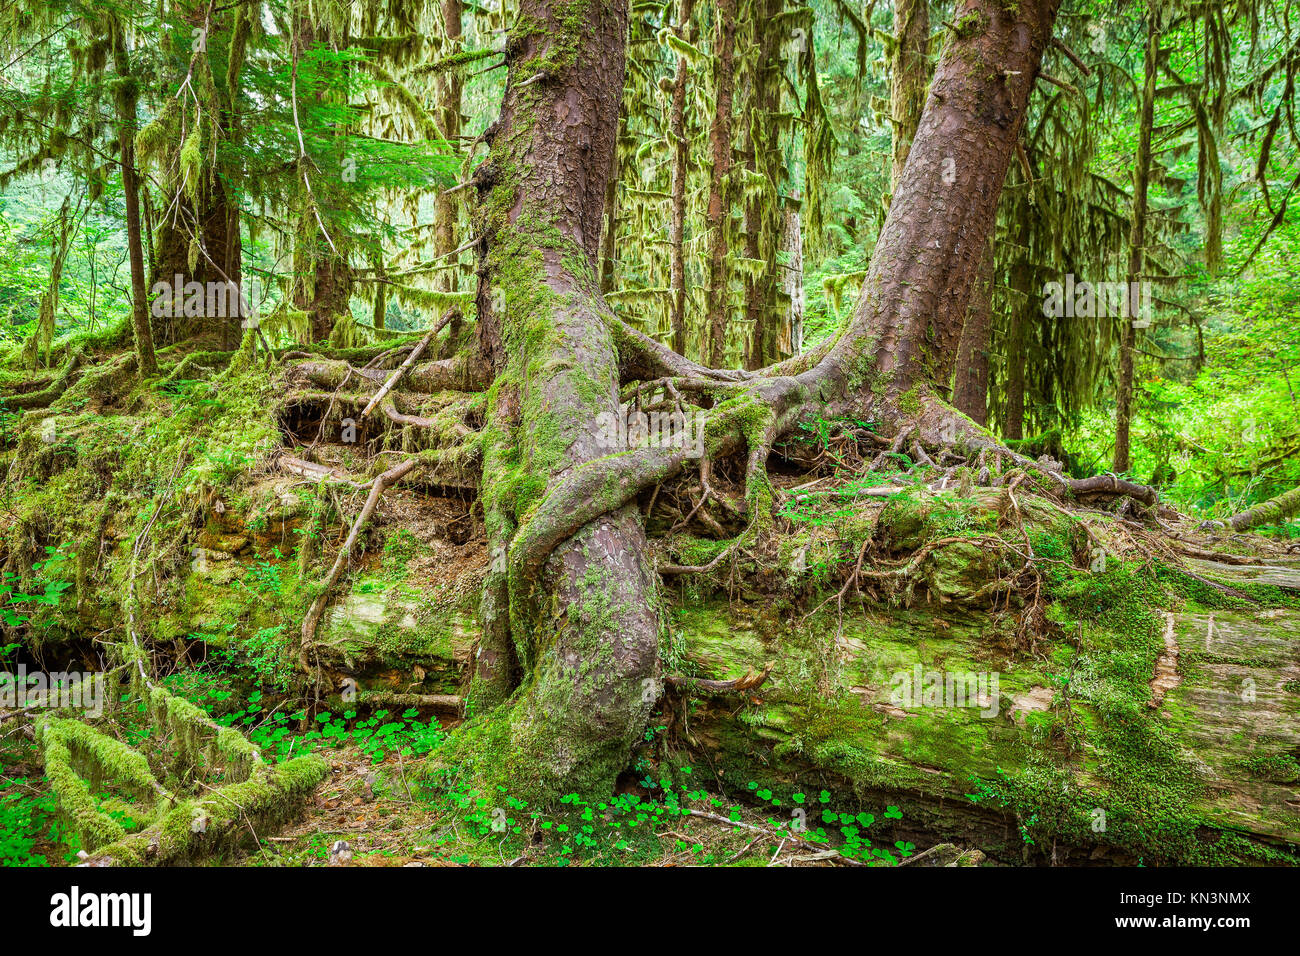 Nurse tree in Olympic National Park, Olympic Peninsula, Washington. Stock photo of young trees growing on and over a downed Nurse Tree in the Hall of Stock Photo